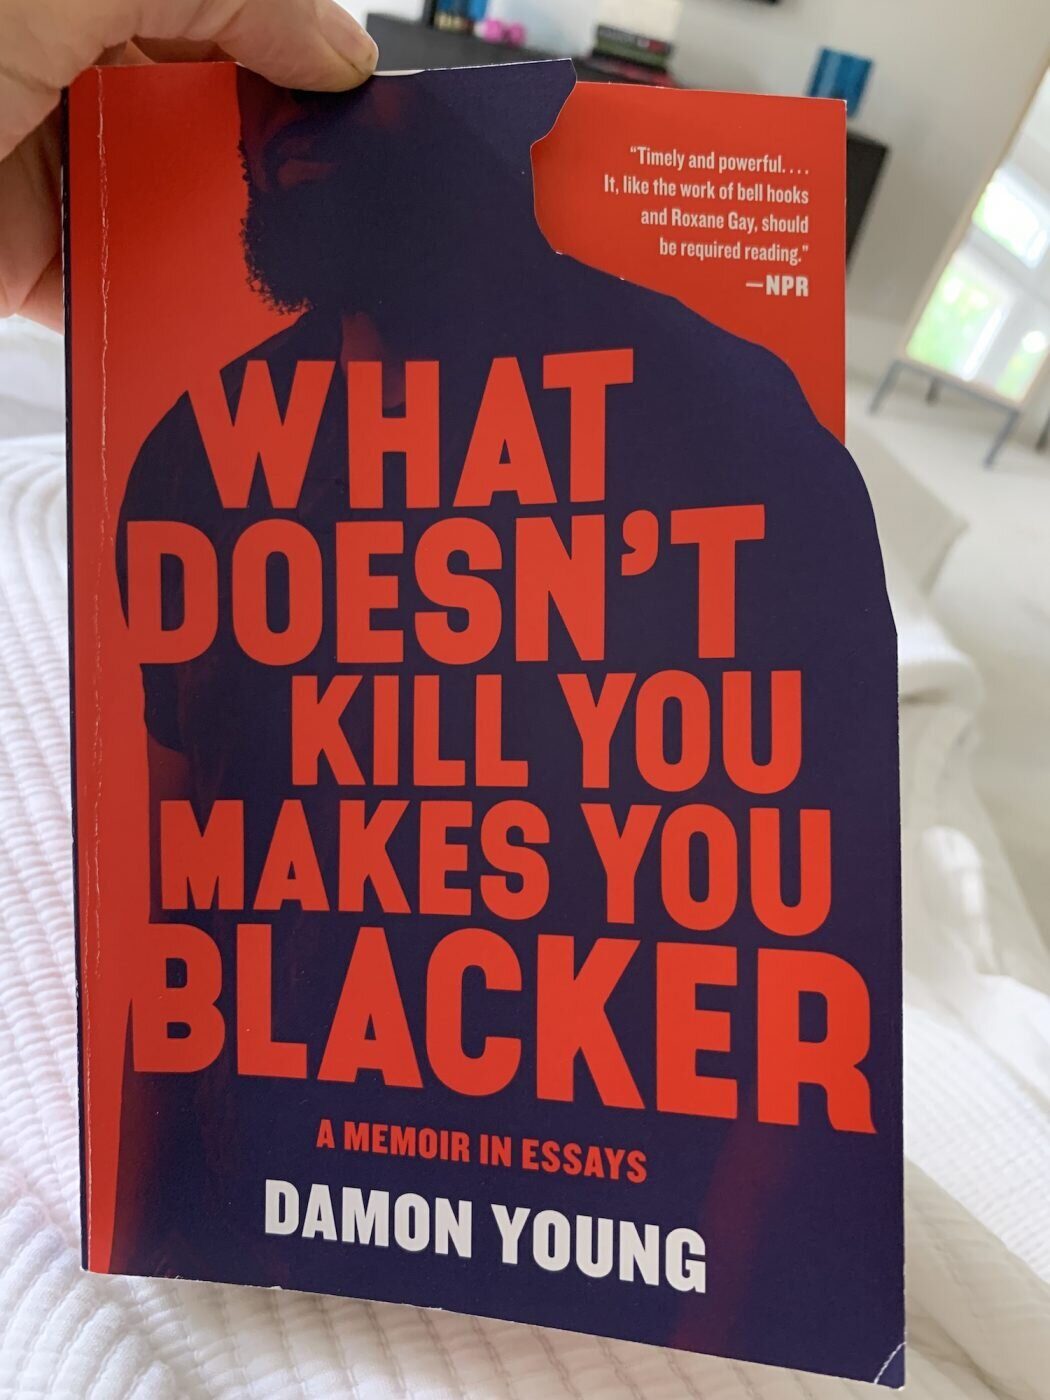 damon young book review